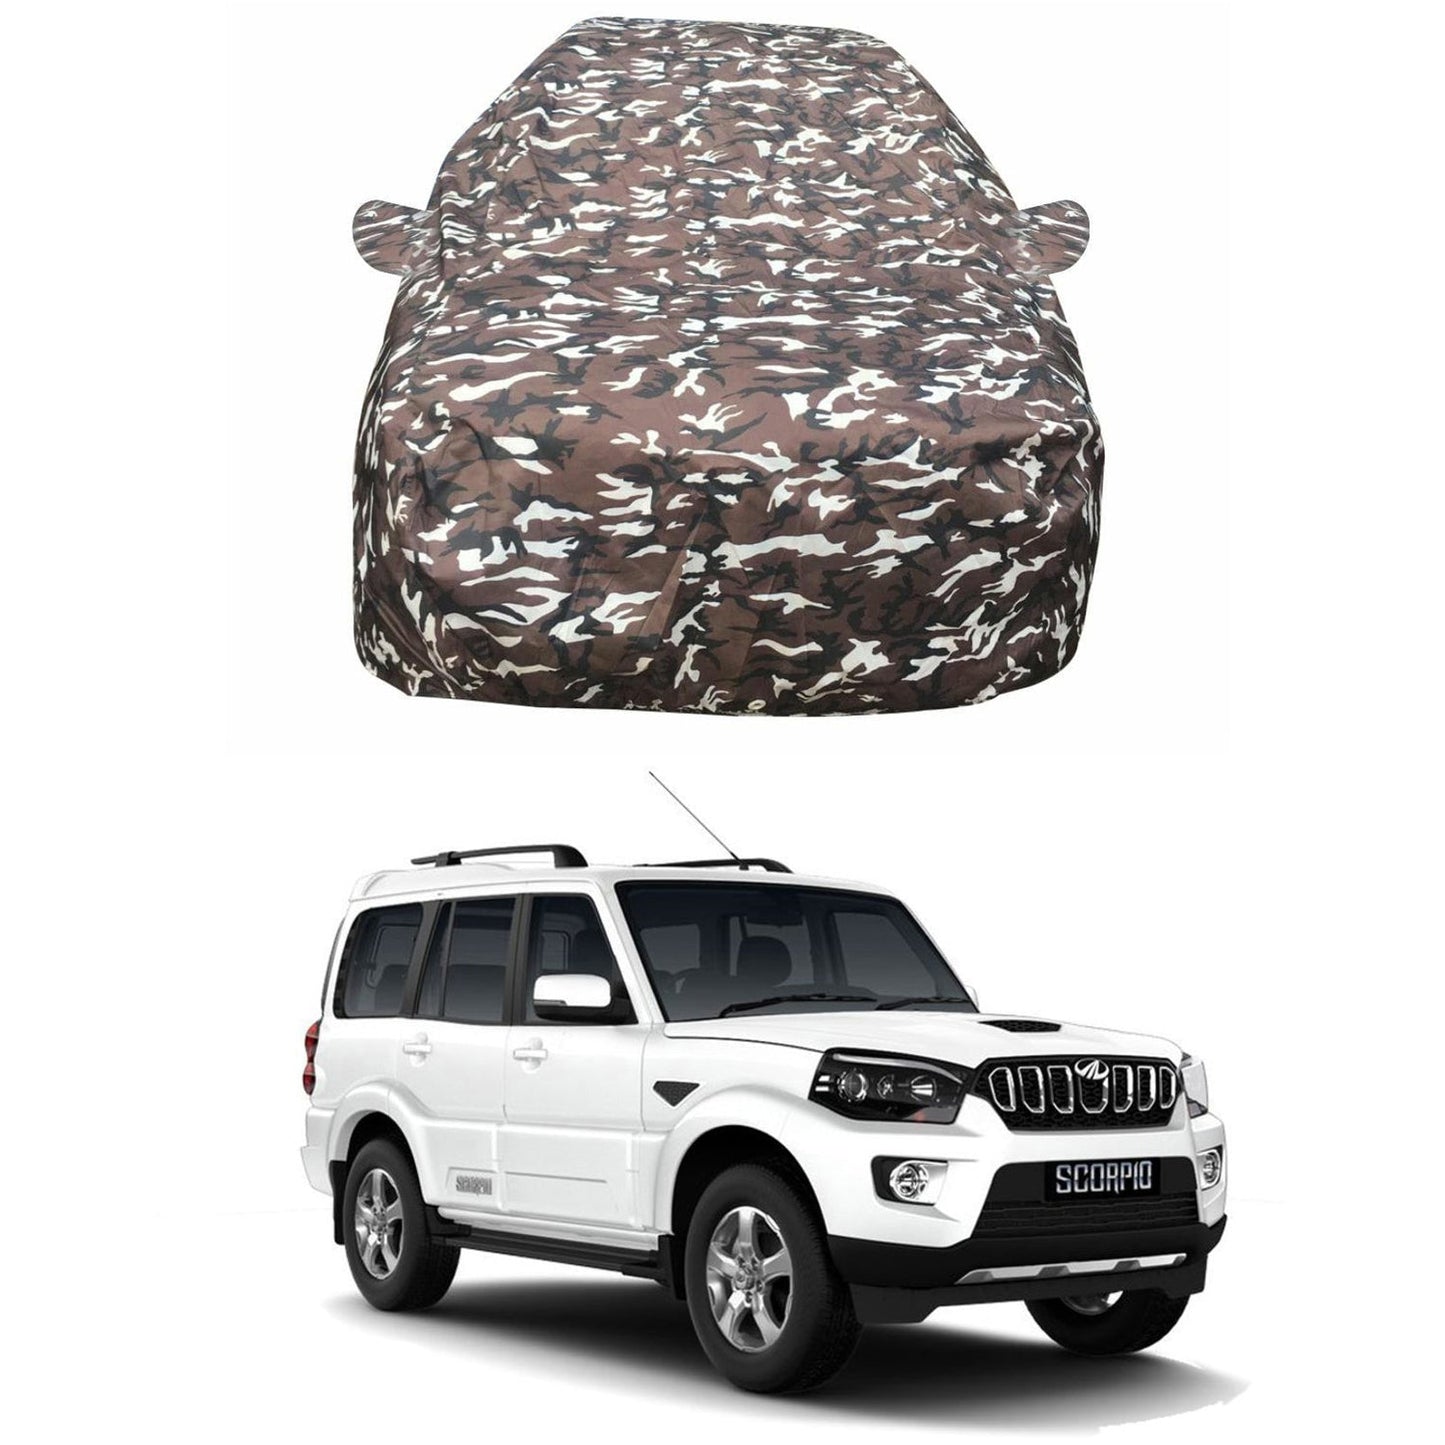 Oshotto Ranger Design Made of 100% Waterproof Fabric Multicolor Car Body Cover with Mirror Pockets For Mahindra Scorpio